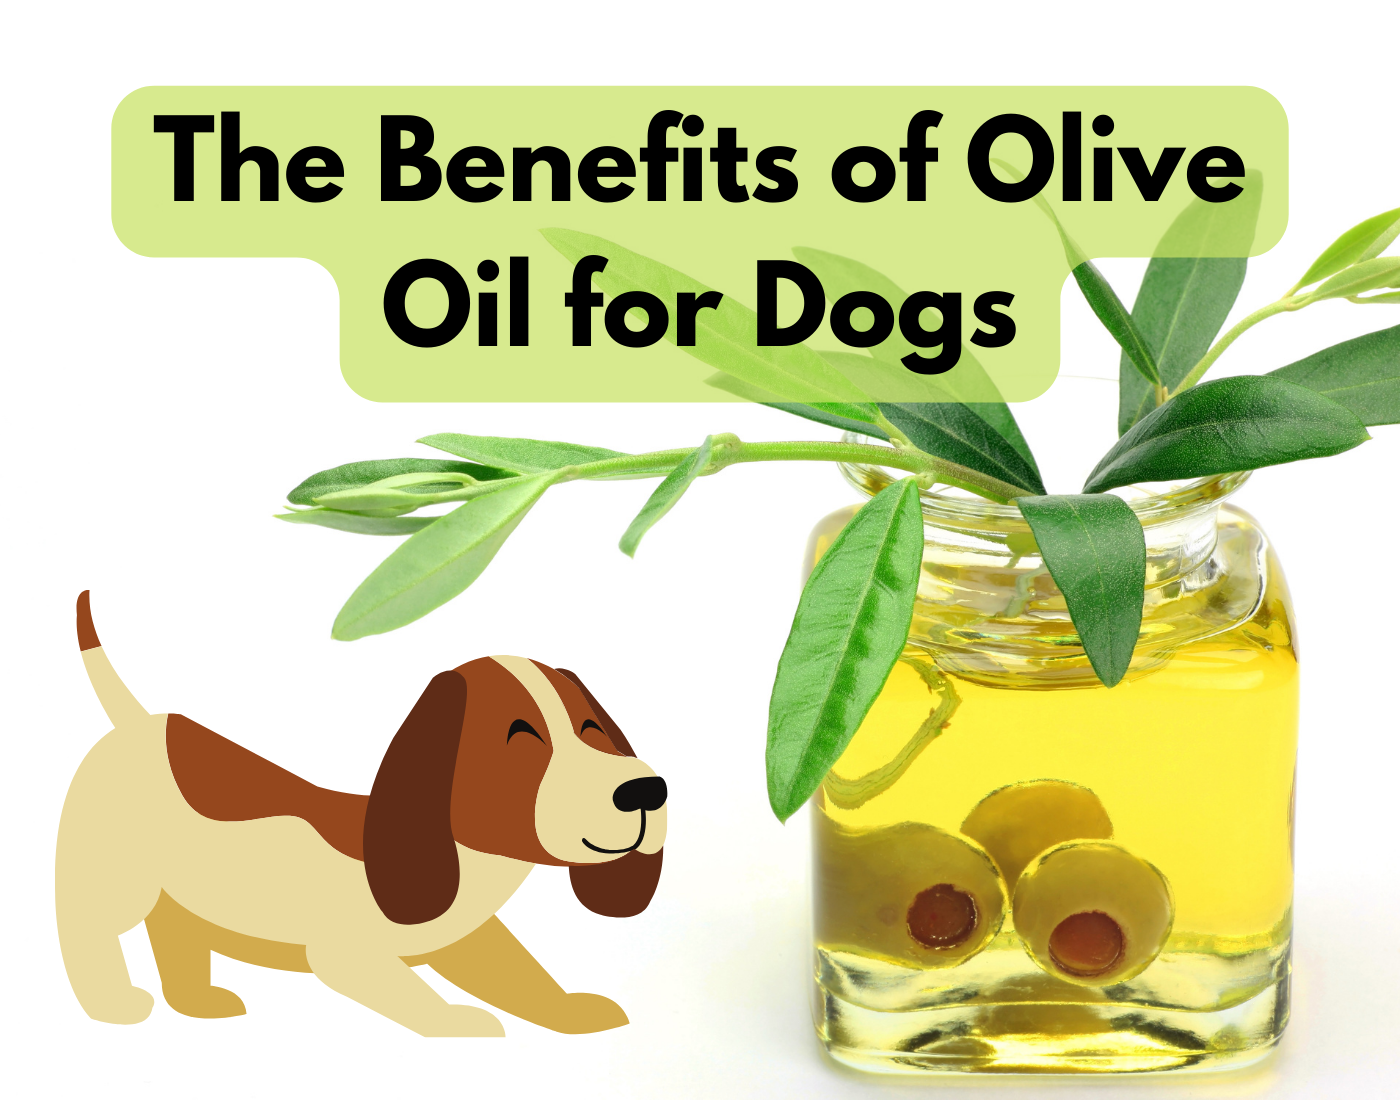 There are numerous benefits of oilve oil or dogs as discussed in this guide